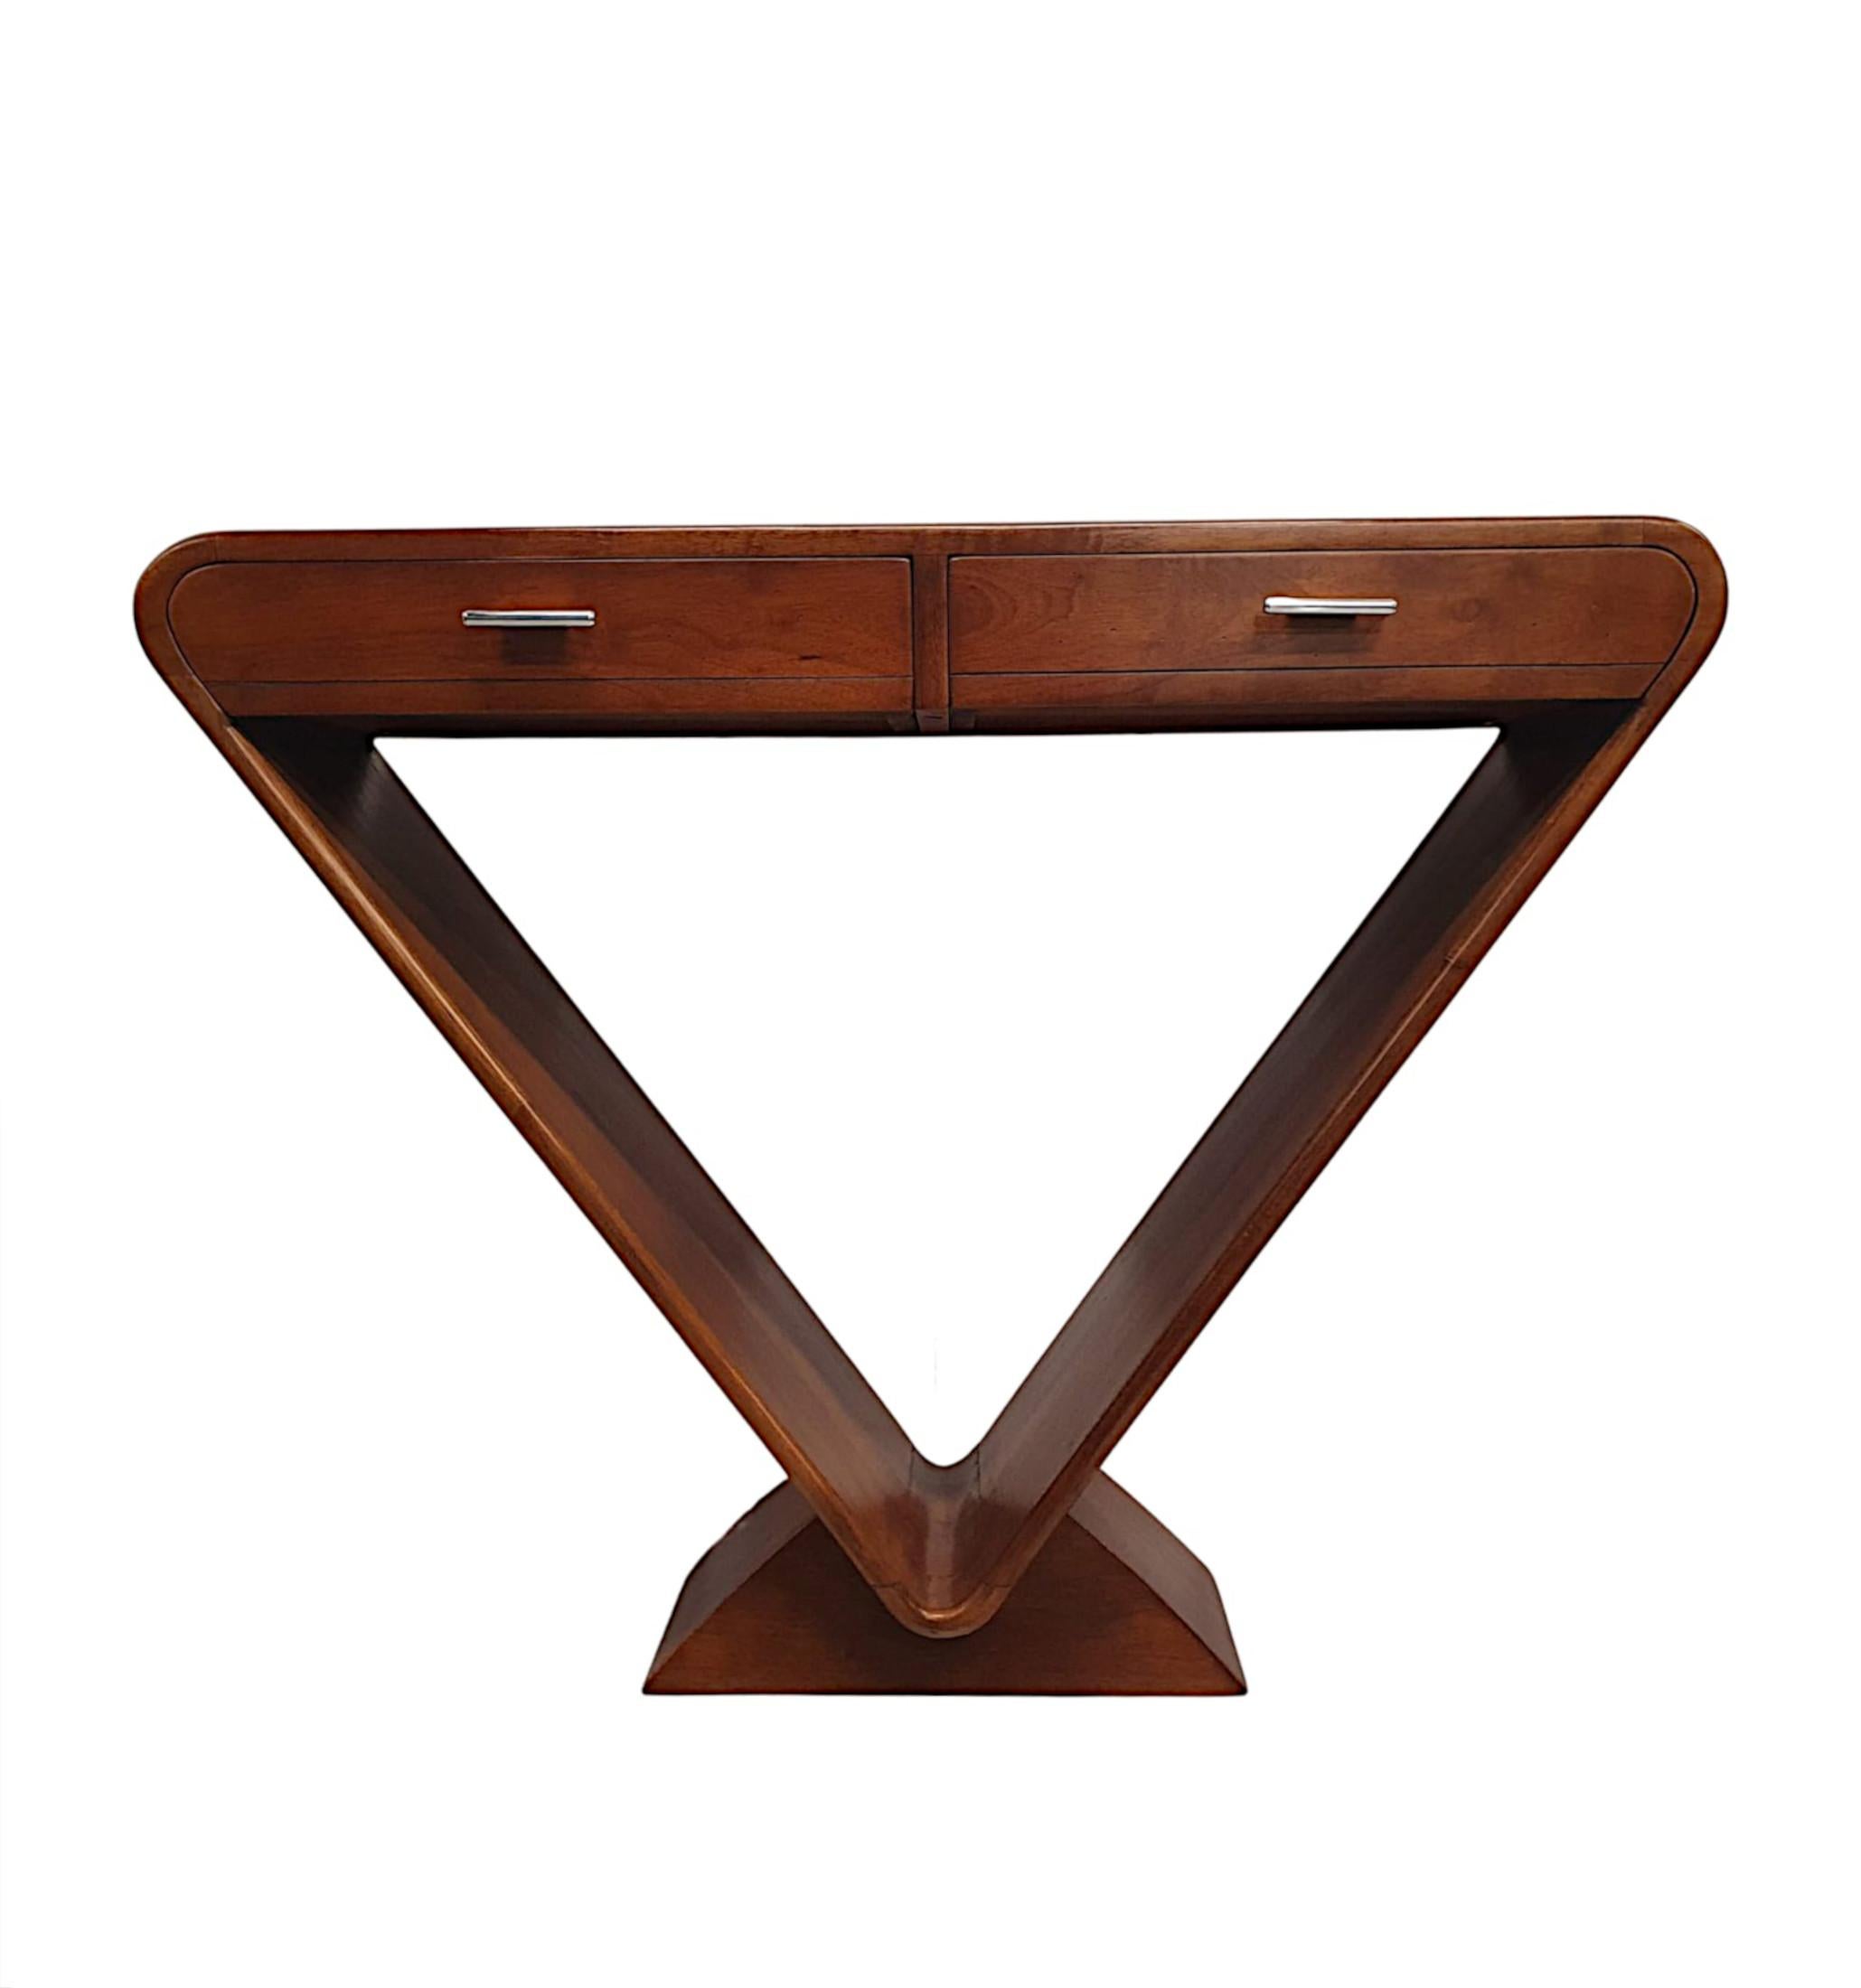 French Stunning Quality Console Table in the Art Deco Style